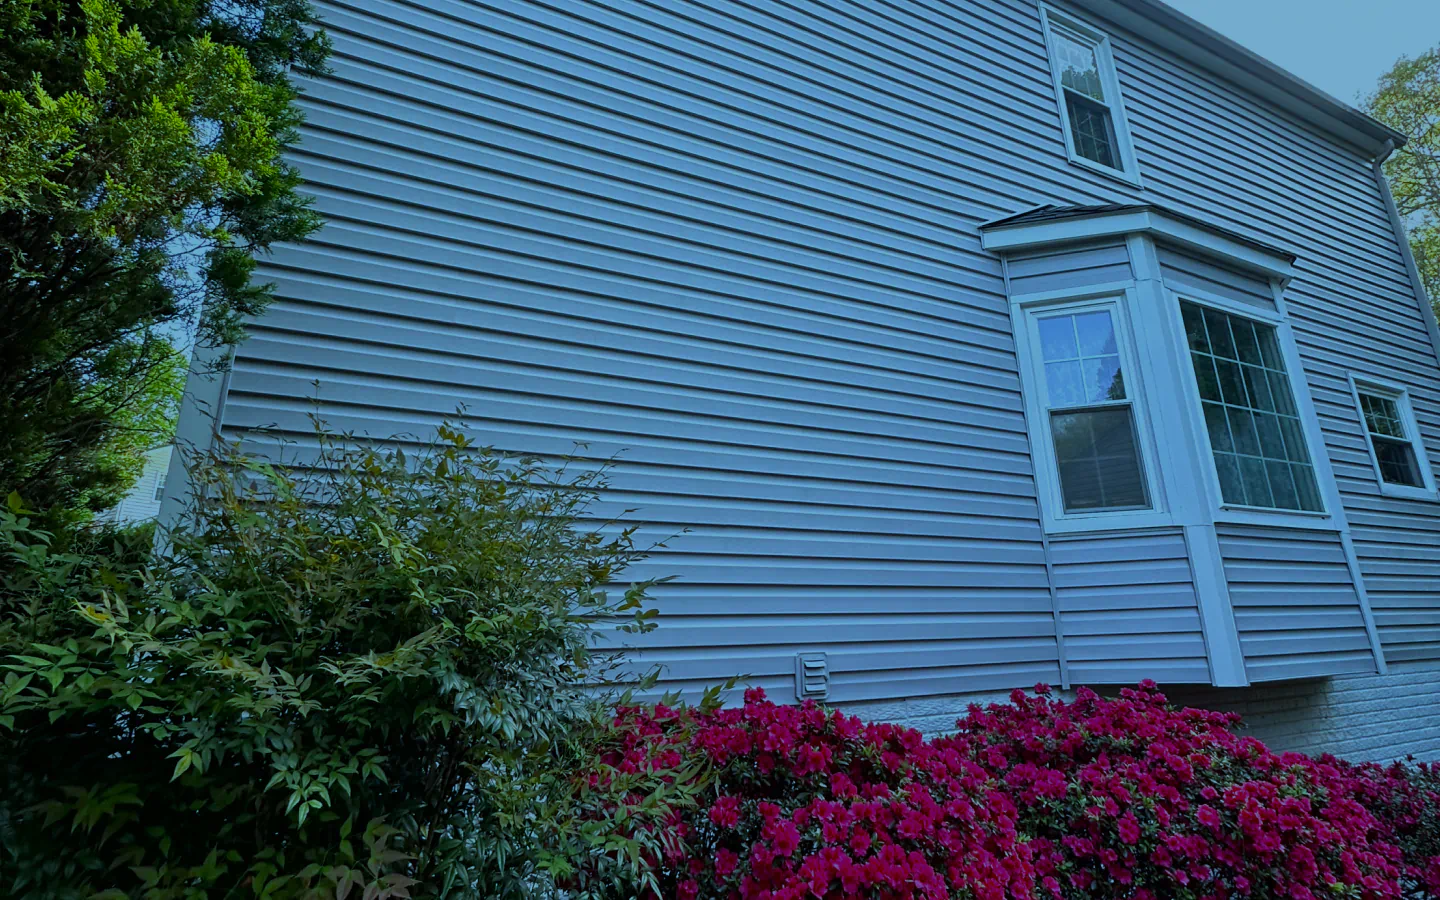 exterior view of a residential house after washing